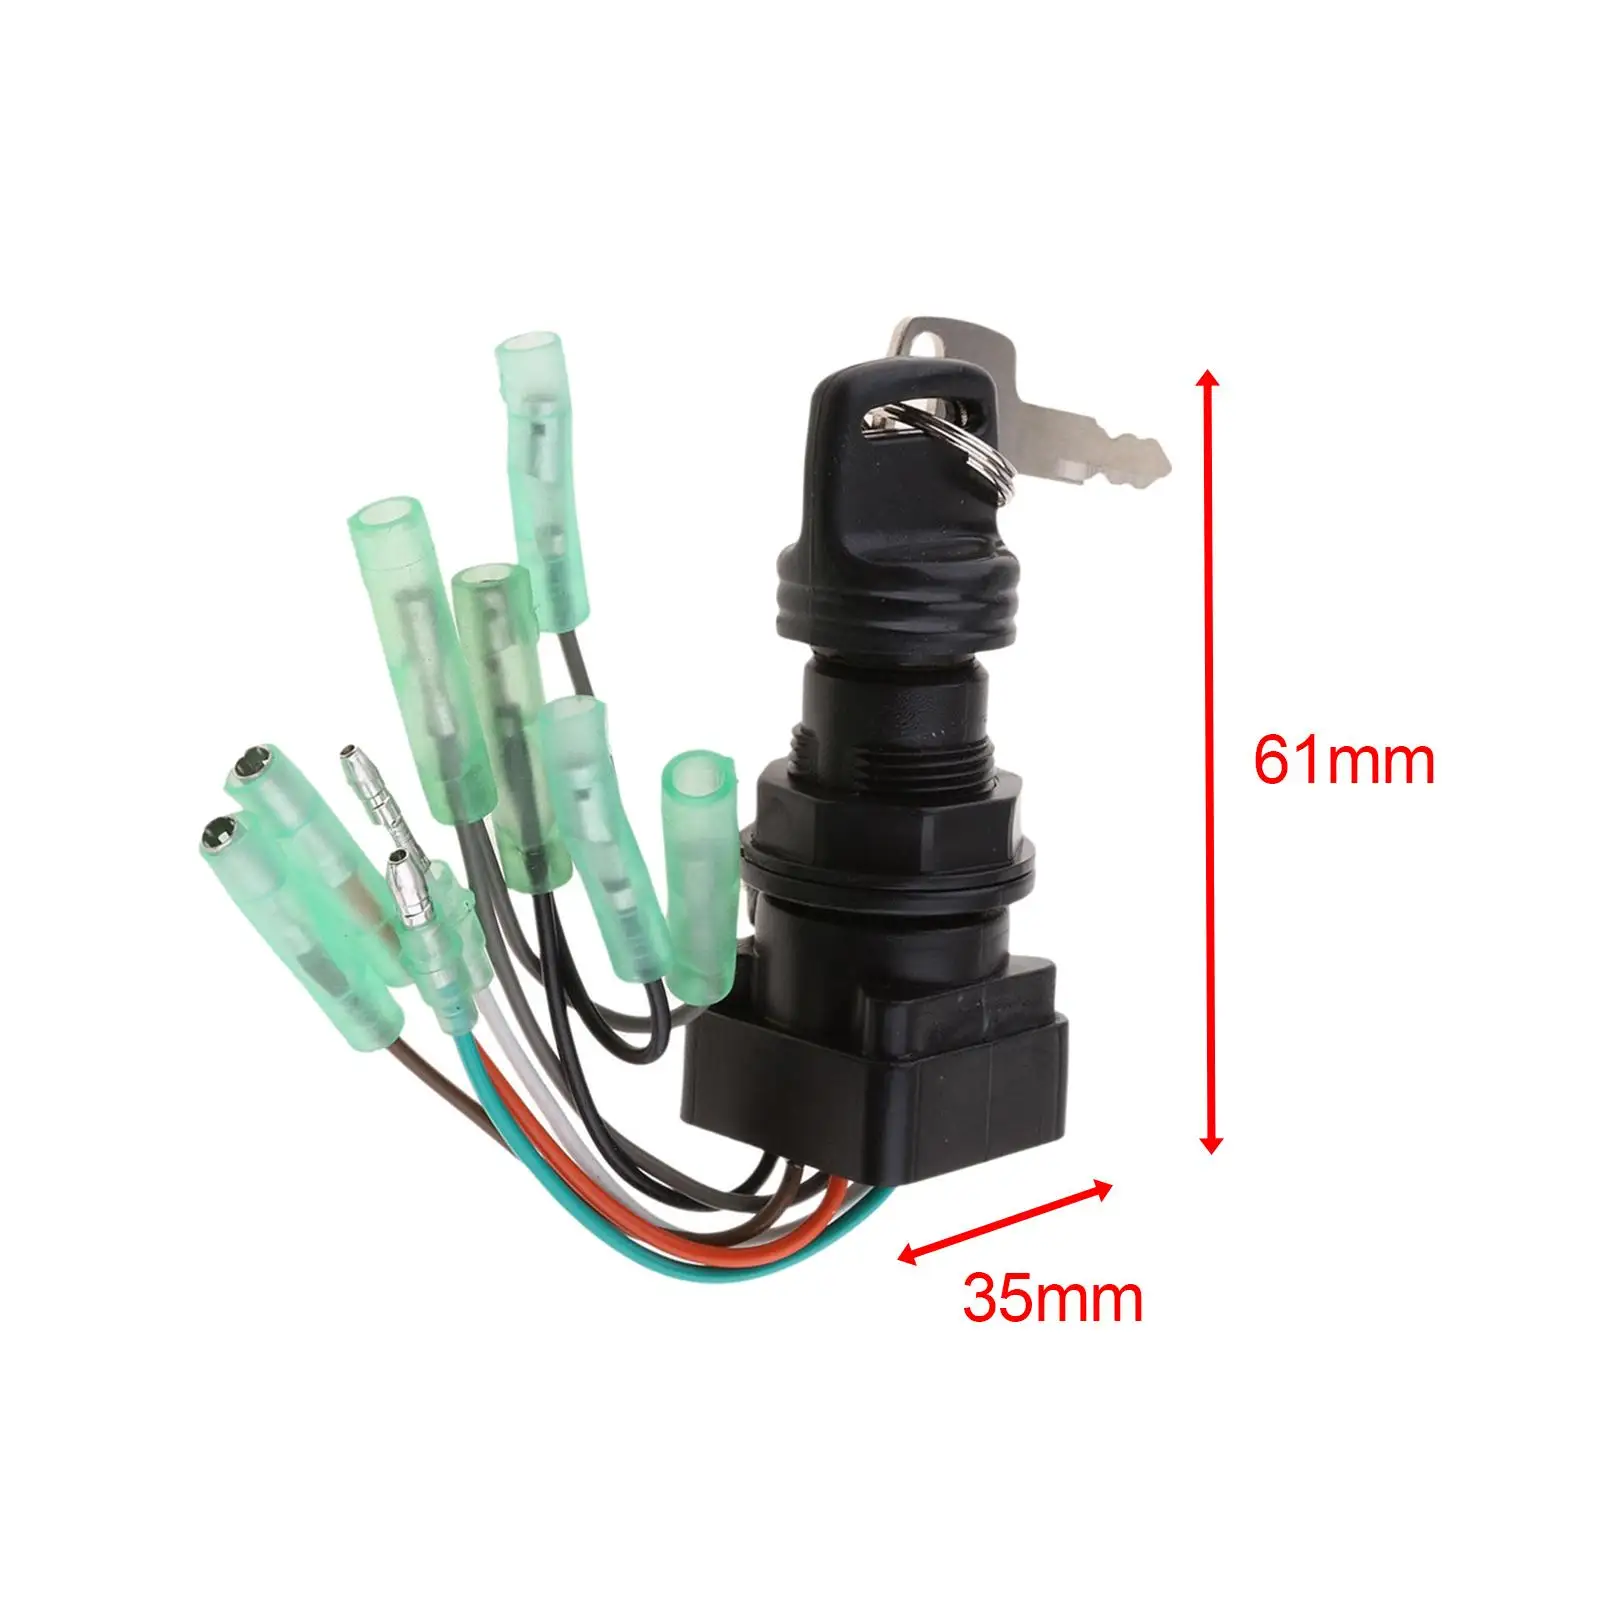 Professional Boat Ignition Key Switch Sturdy High Performance Boat Ignition Switch with 2 Keys for Suzuki Parts Assembly